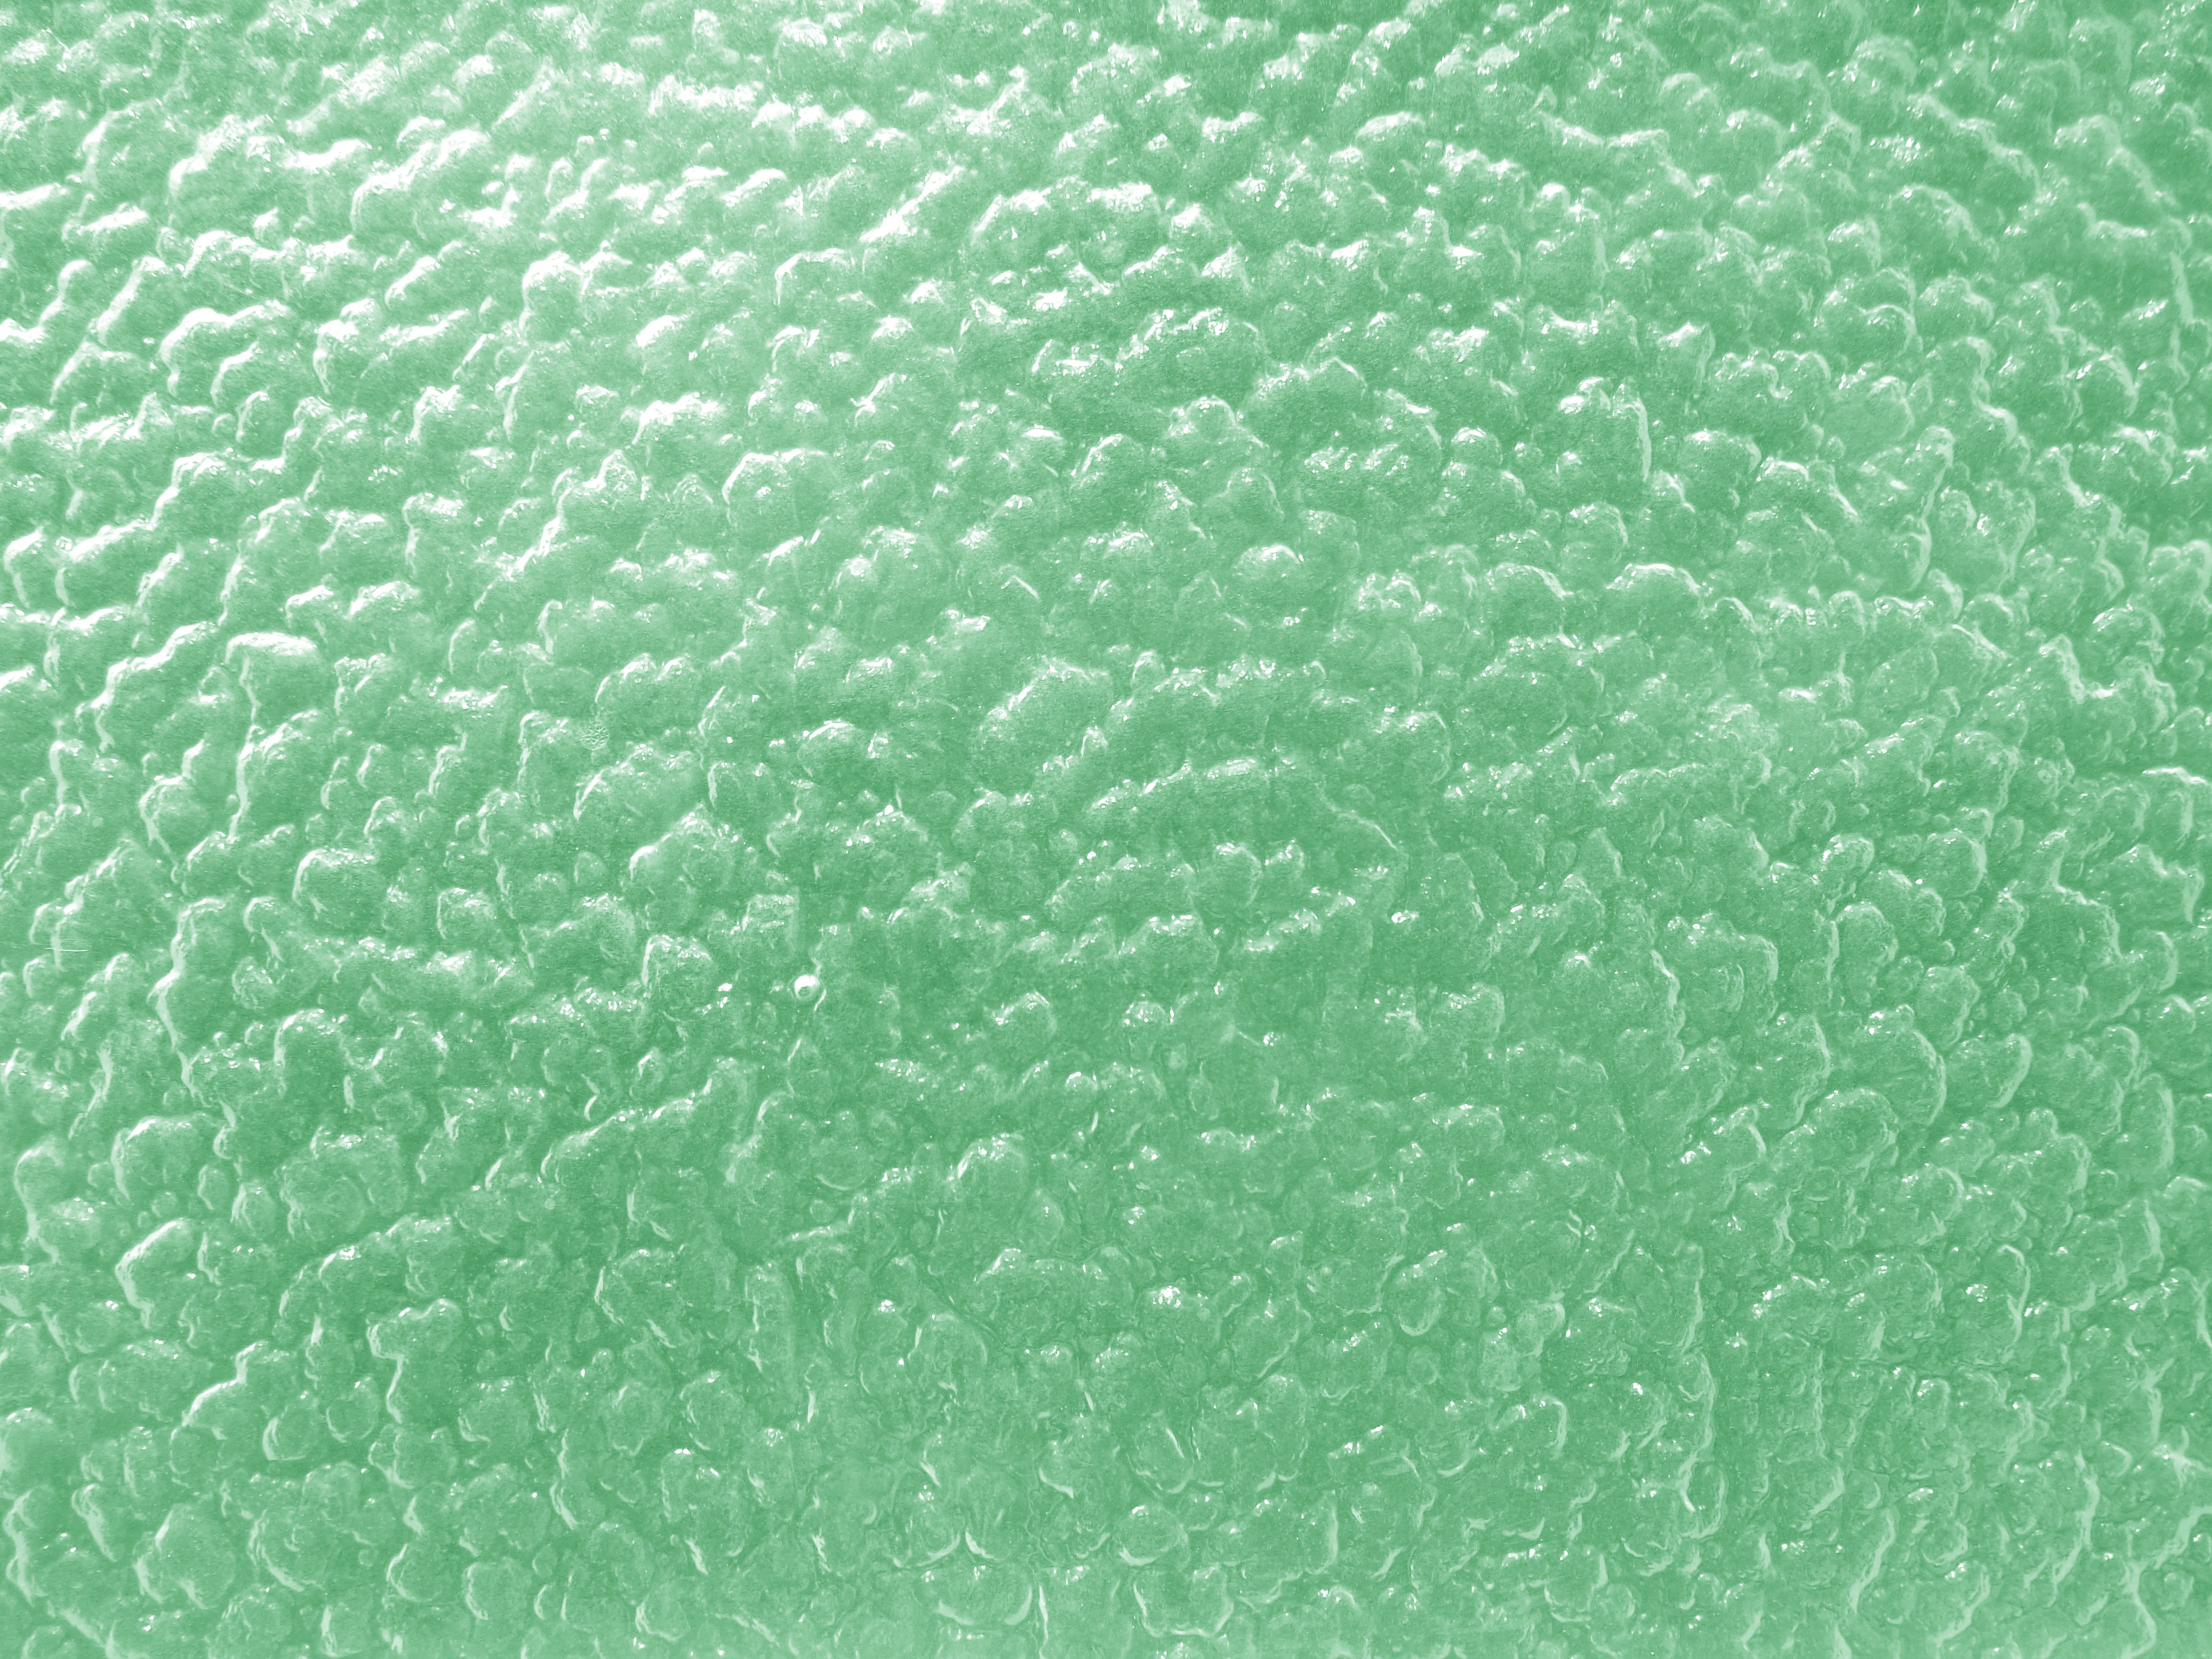 Mint Green Textured Glass With Bumpy Surface Picture Photograph